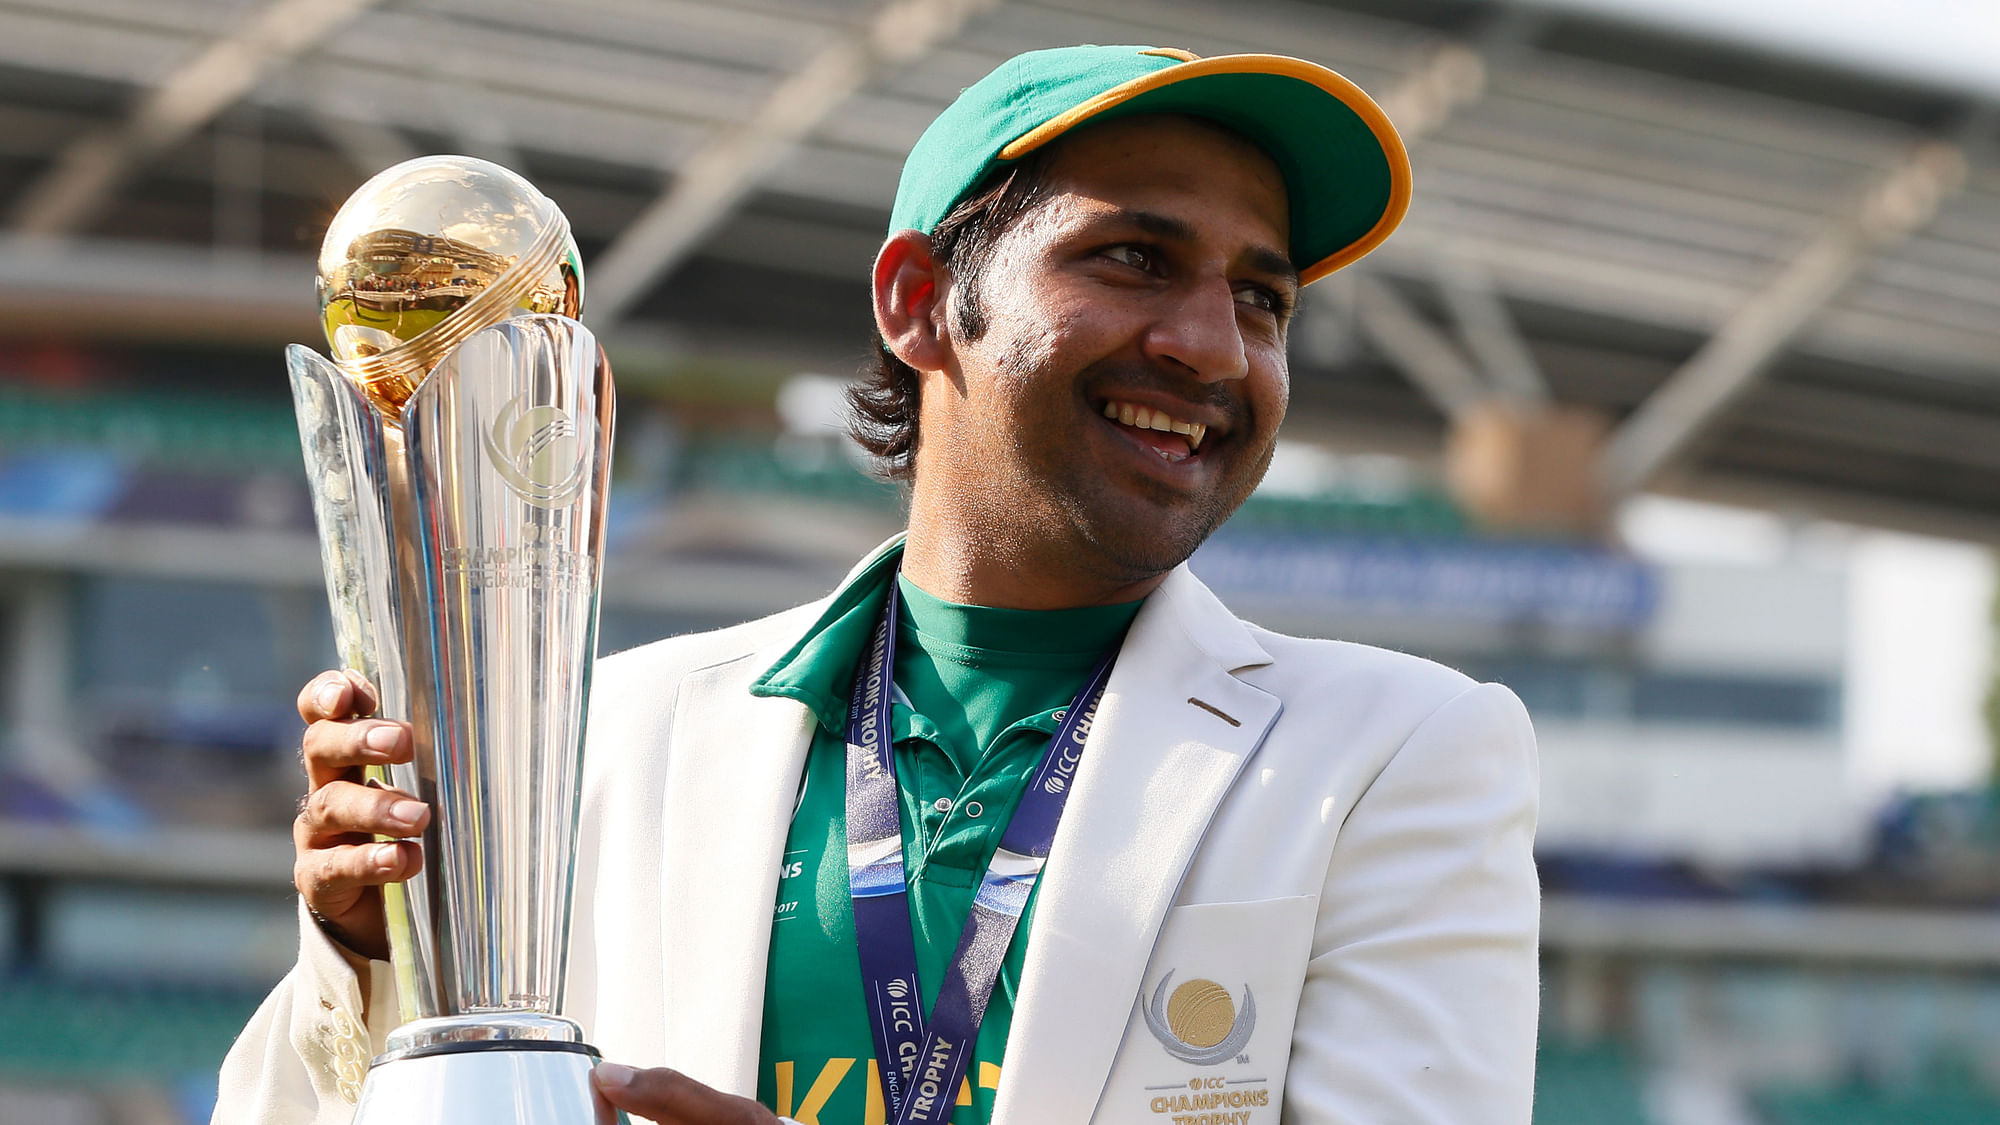 Pakistan’s Sarfraz Ahmed poses with the ICC Champions Trophy. (Photo: AP)